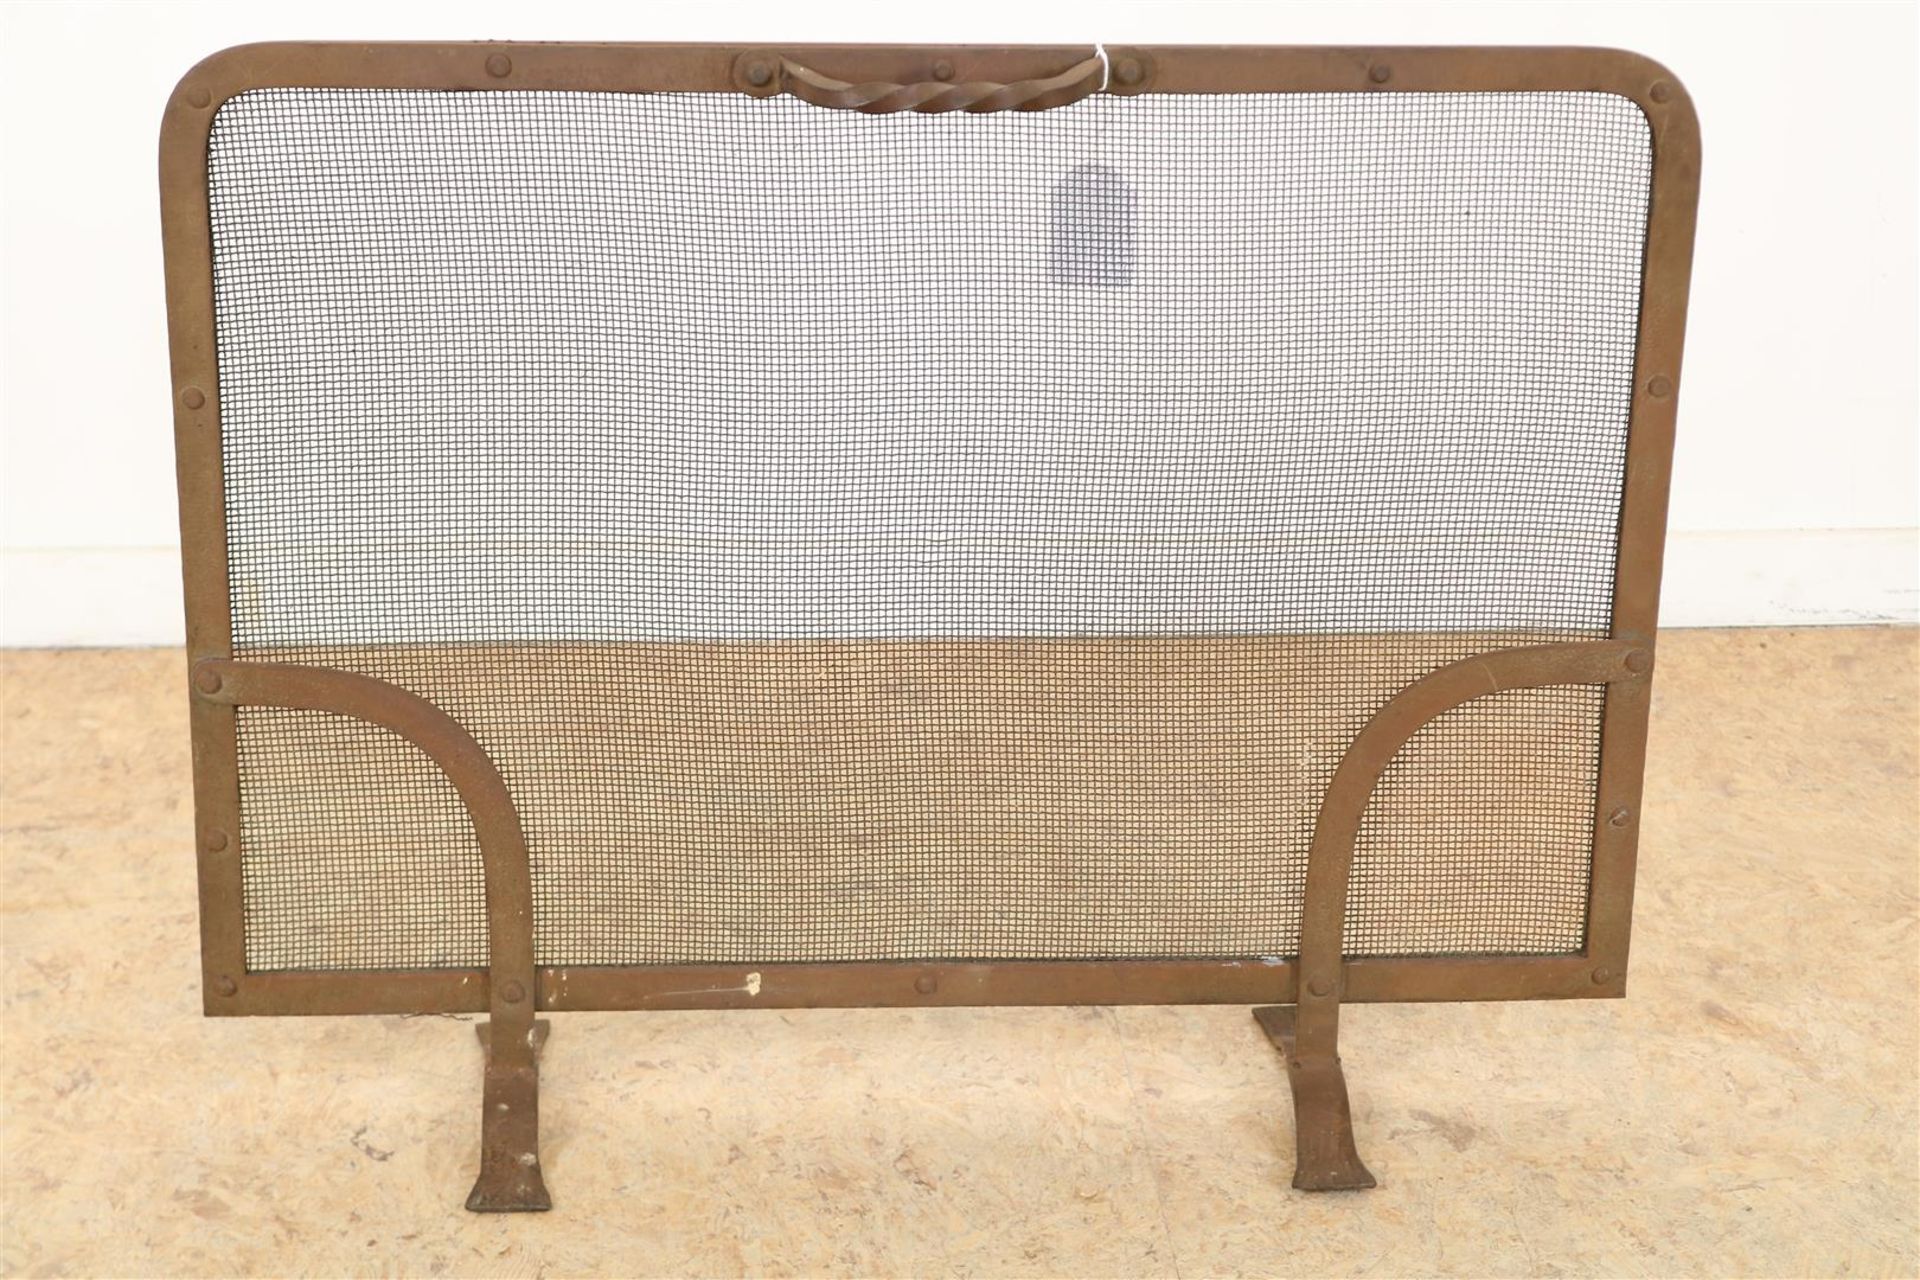 Wrought iron fireplace grate with 3 piece fireplace set, including shovel and tongs, 45 x 57 x 29 - Image 4 of 4